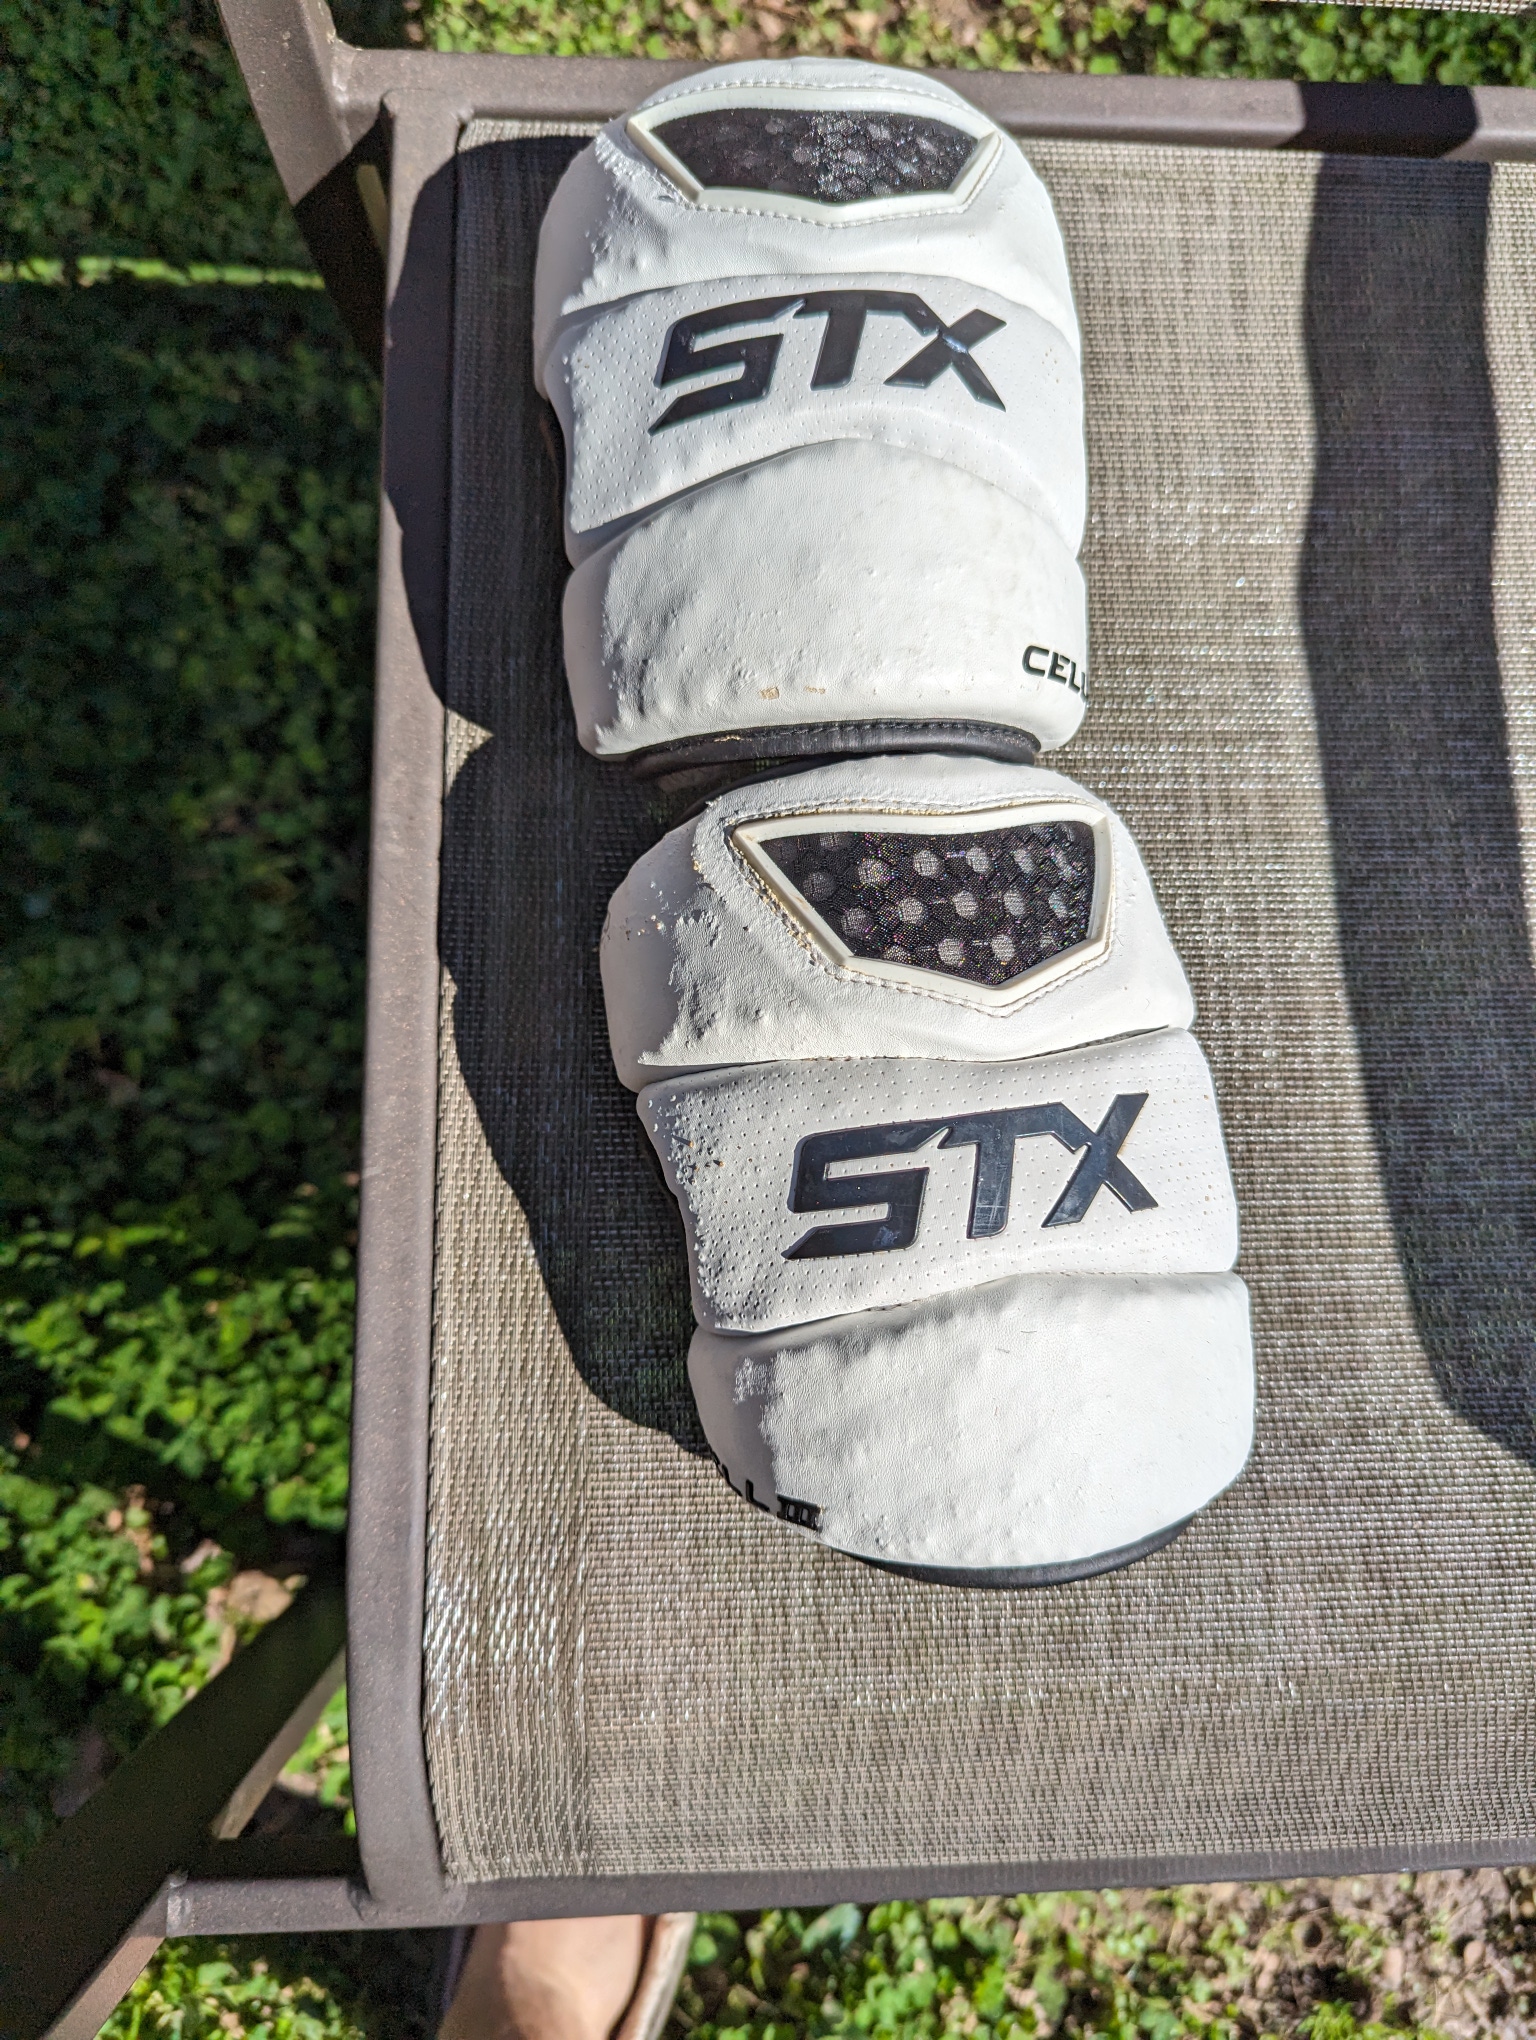 Adult Used Large STX Cell IV Arm Pads